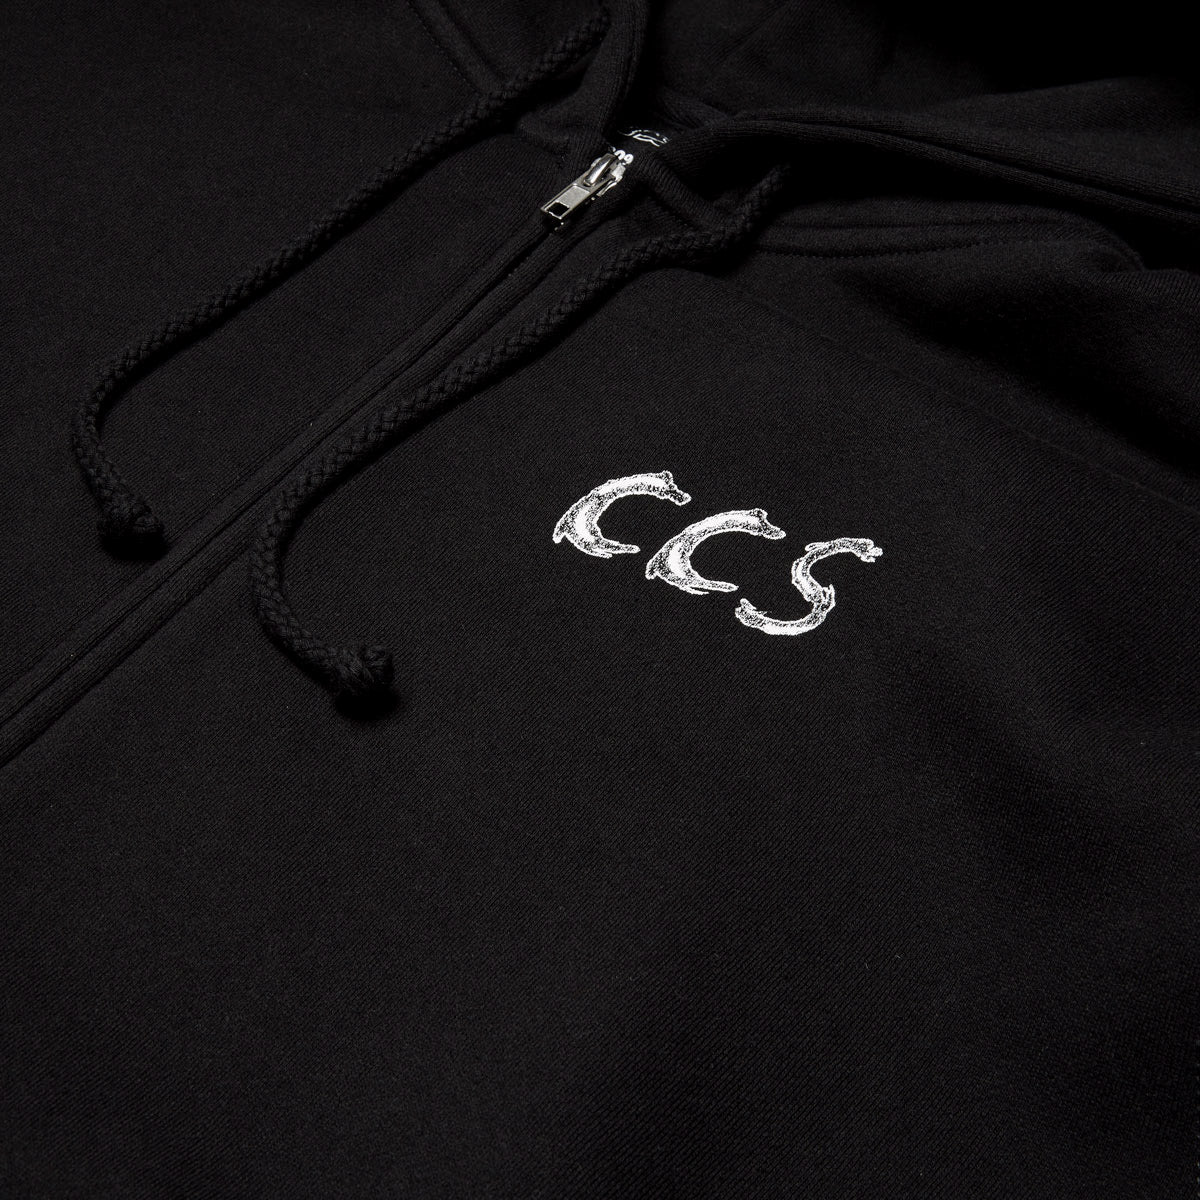 CCS Smile on the Surface Zip Hoodie - Black/White image 4